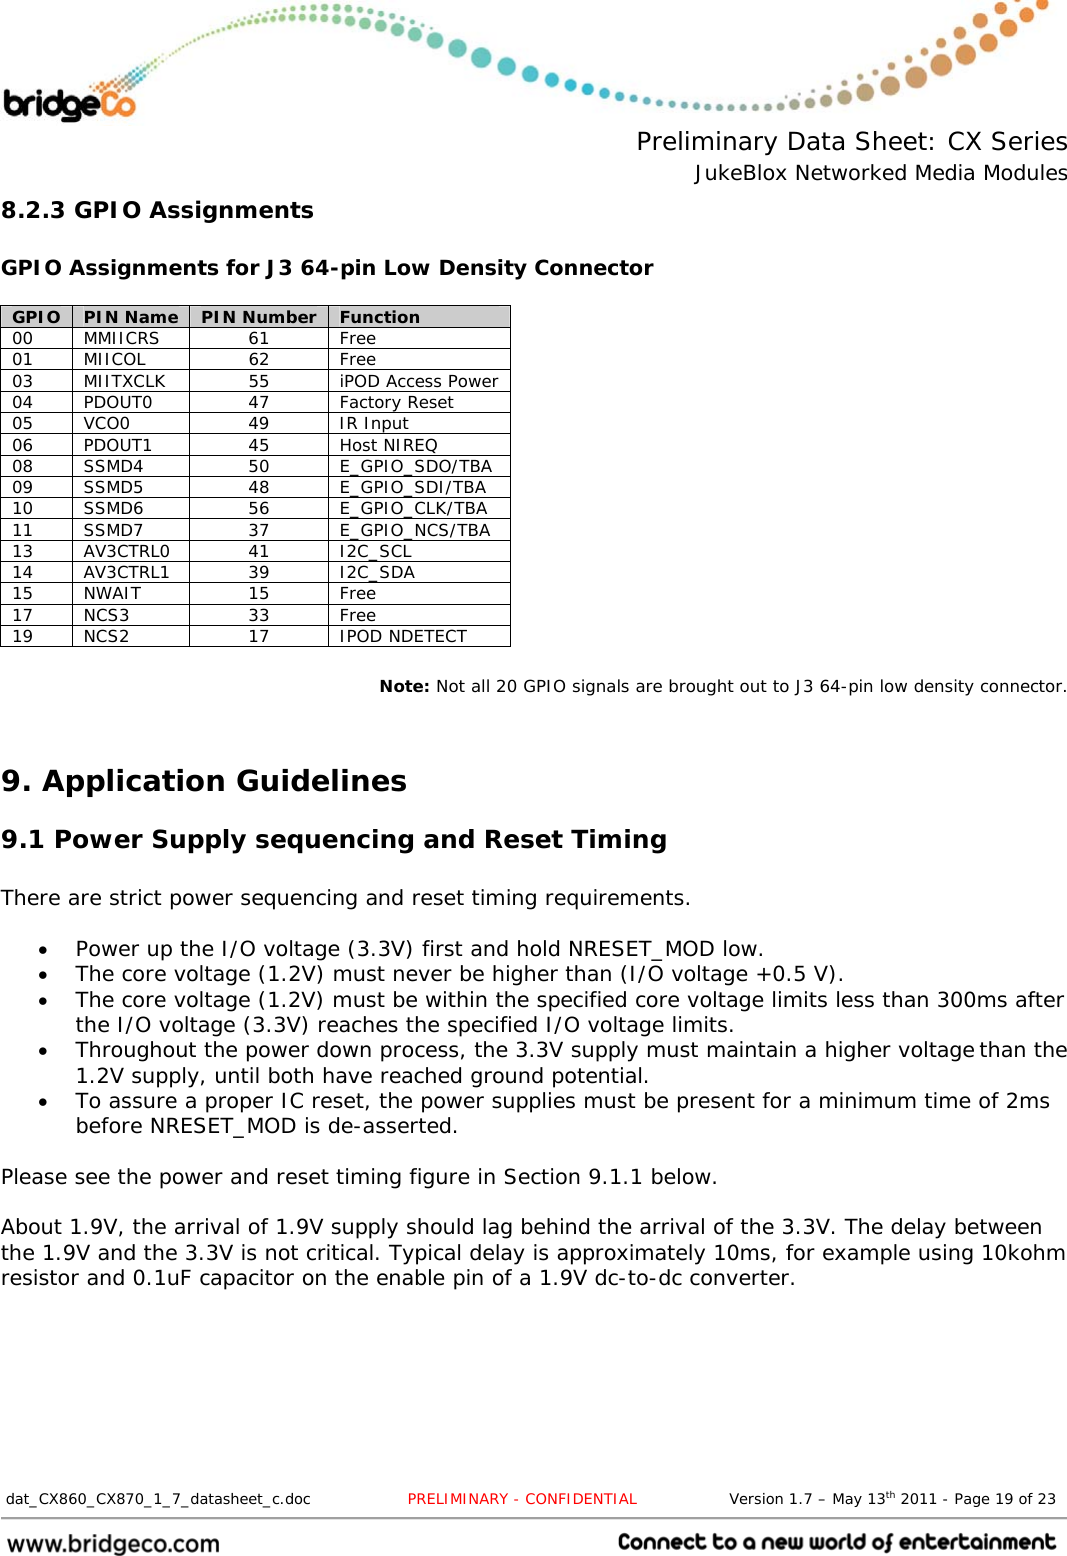  Preliminary Data Sheet: CX Series JukeBlox Networked Media Modules  dat_CX860_CX870_1_7_datasheet_c.doc                   PRELIMINARY - CONFIDENTIAL                  Version 1.7 – May 13th 2011 - Page 19 of 23                                 8.2.3 GPIO Assignments  GPIO Assignments for J3 64-pin Low Density Connector  GPIO  PIN Name  PIN Number  Function 00 MMIICRS  61  Free 01 MIICOL  62  Free 03  MIITXCLK  55  iPOD Access Power 04 PDOUT0  47  Factory Reset 05 VCO0  49  IR Input 06 PDOUT1  45  Host NIREQ 08 SSMD4  50  E_GPIO_SDO/TBA 09 SSMD5  48  E_GPIO_SDI/TBA 10 SSMD6  56  E_GPIO_CLK/TBA 11 SSMD7  37  E_GPIO_NCS/TBA 13 AV3CTRL0  41  I2C_SCL 14 AV3CTRL1  39  I2C_SDA 15 NWAIT  15  Free 17 NCS3  33  Free 19 NCS2  17  IPOD NDETECT  Note: Not all 20 GPIO signals are brought out to J3 64-pin low density connector.  9. Application Guidelines 9.1 Power Supply sequencing and Reset Timing  There are strict power sequencing and reset timing requirements.   Power up the I/O voltage (3.3V) first and hold NRESET_MOD low. The core voltage (1.2V) must never be higher than (I/O voltage +0.5 V). The core voltage (1.2V) must be within the specified core voltage limits less than 300ms afterthe I/O voltage (3.3V) reaches the specified I/O voltage limits. Throughout the power down process, the 3.3V supply must maintain a higher voltagethan the 1.2V supply, until both have reached ground potential. To assure a proper IC reset, the power supplies must be present for a minimum time of 2msbefore NRESET_MOD is de-asserted. Please see the power and reset timing figure in Section 9.1.1 below. About 1.9V, the arrival of 1.9V supply should lag behind the arrival of the 3.3V. The delay between the 1.9V and the 3.3V is not critical. Typical delay is approximately 10ms, for example using 10kohm resistor and 0.1uF capacitor on the enable pin of a 1.9V dc-to-dc converter. 